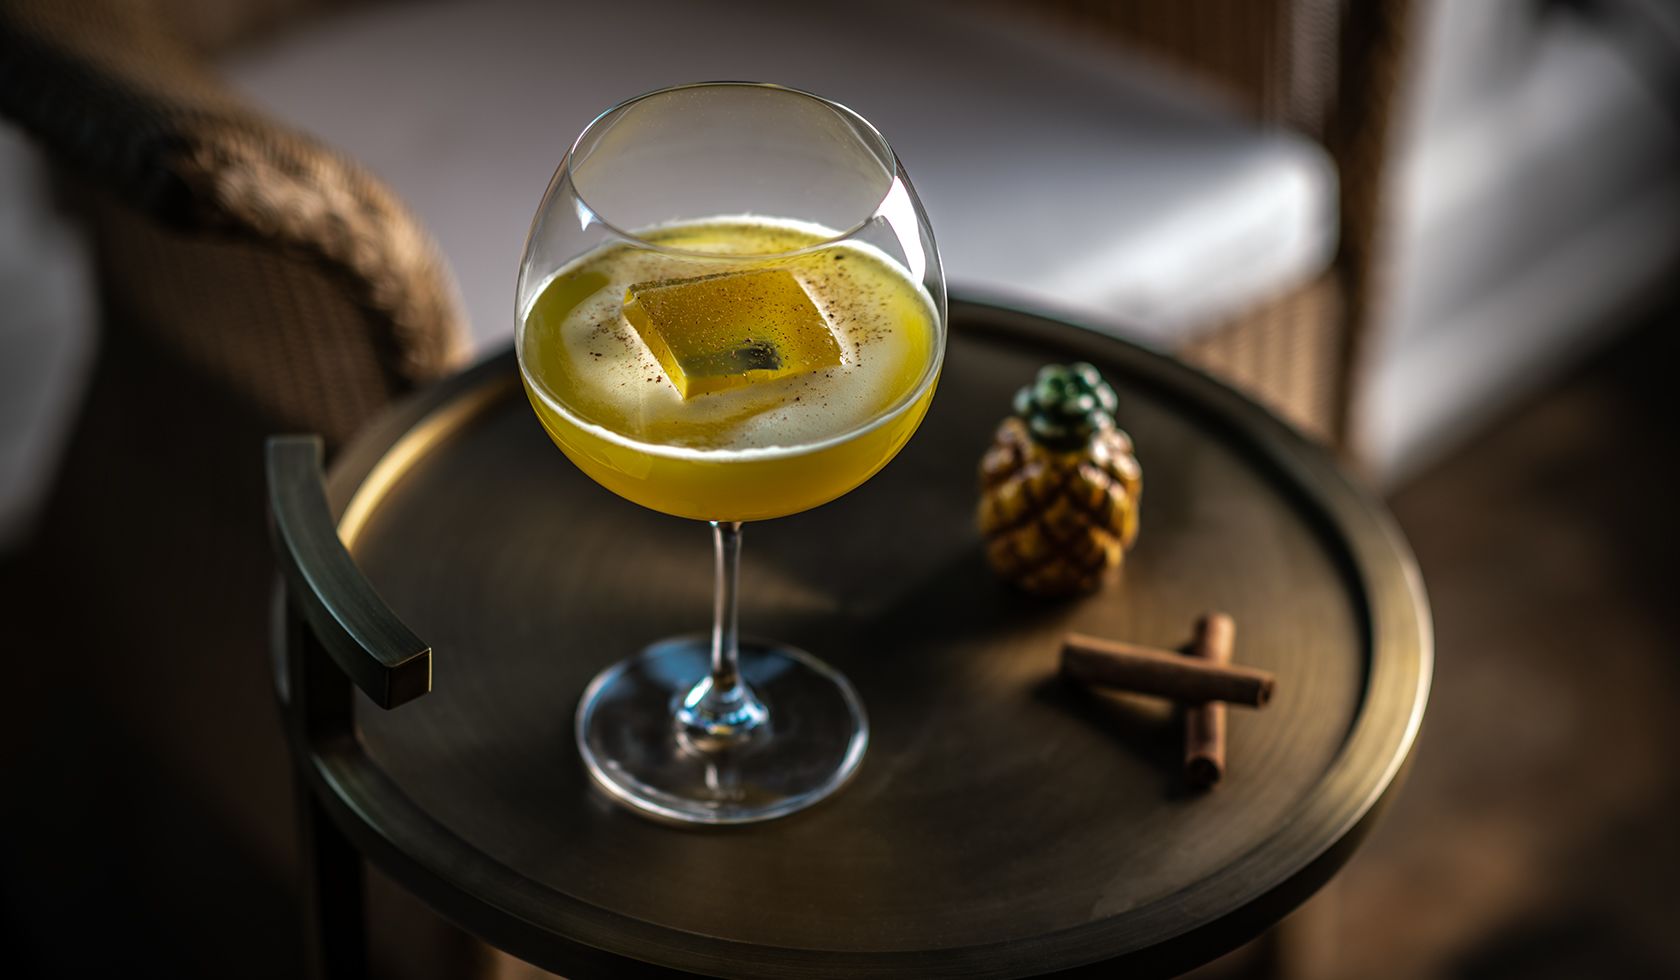 A Glass Of Yellow Liquid With A Toy Figurine On A Wood Surface